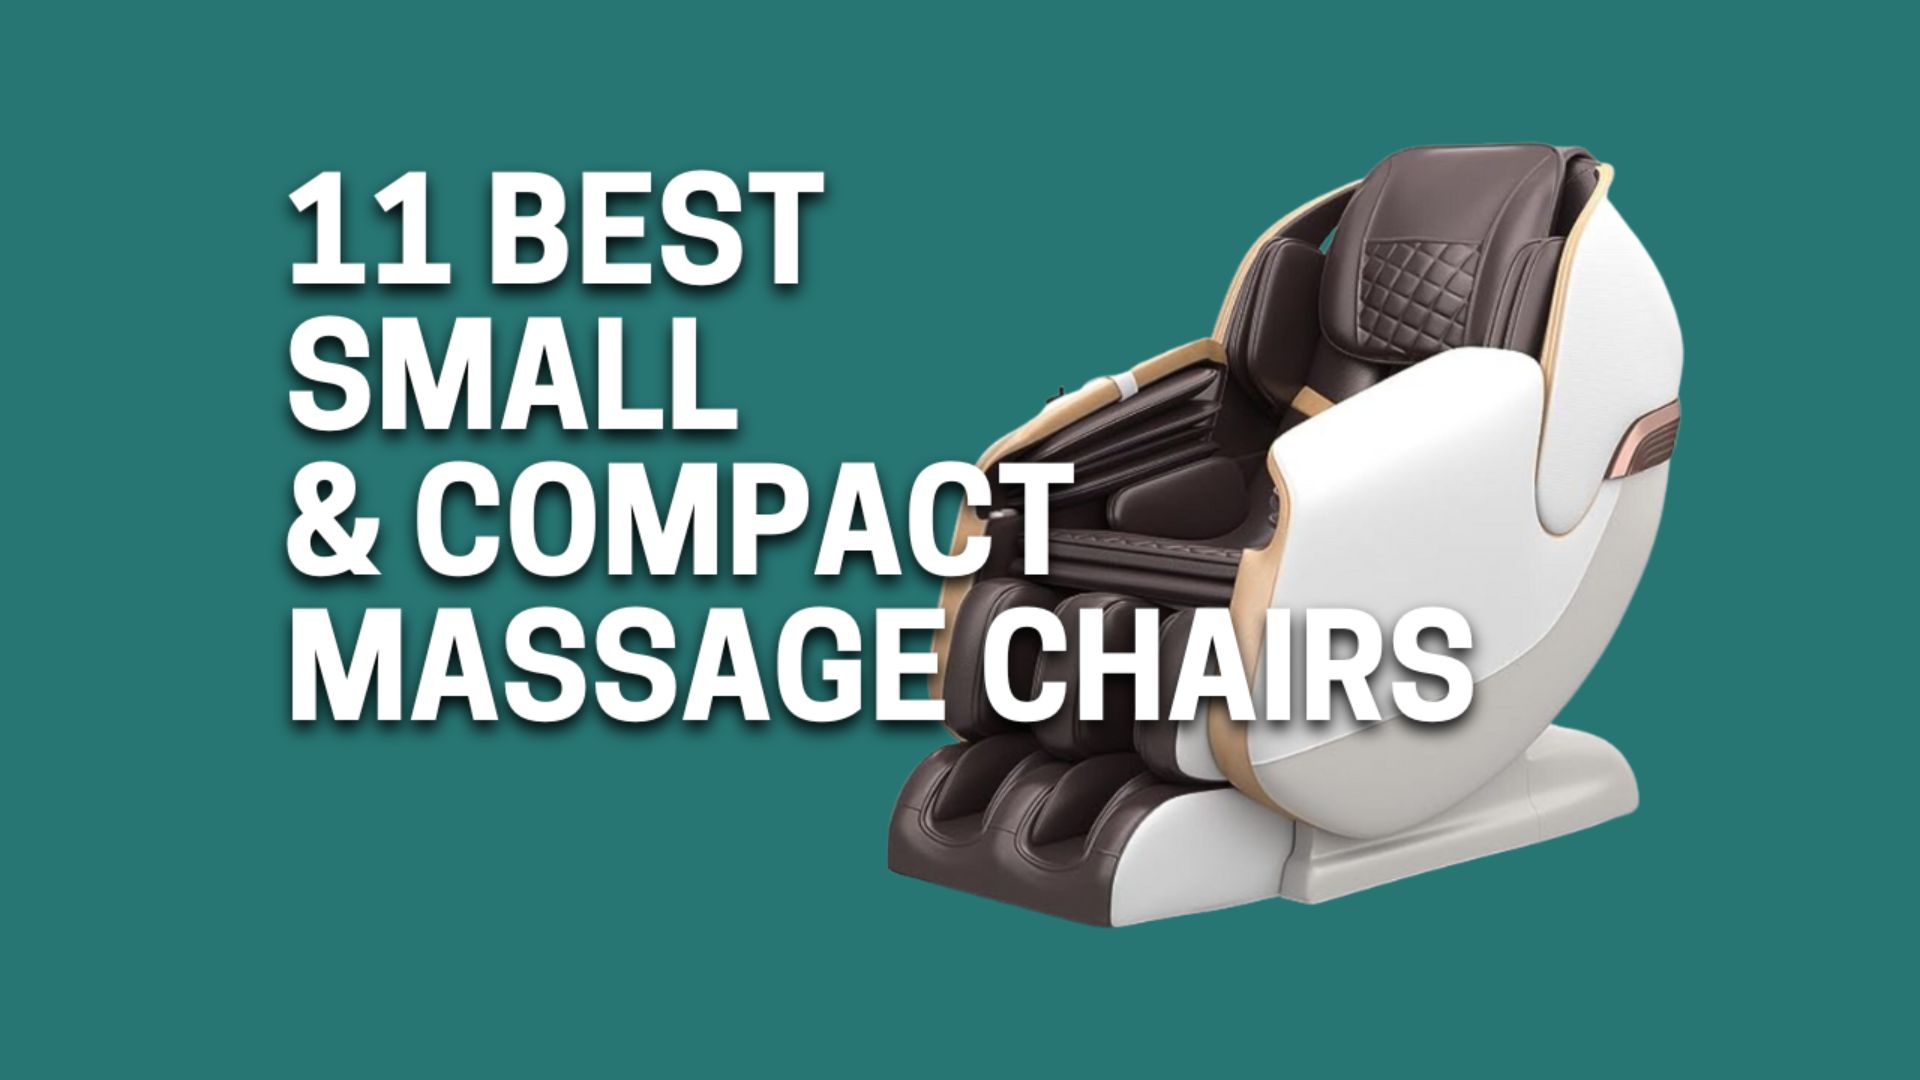 Best Small & Compact Massage Chairs